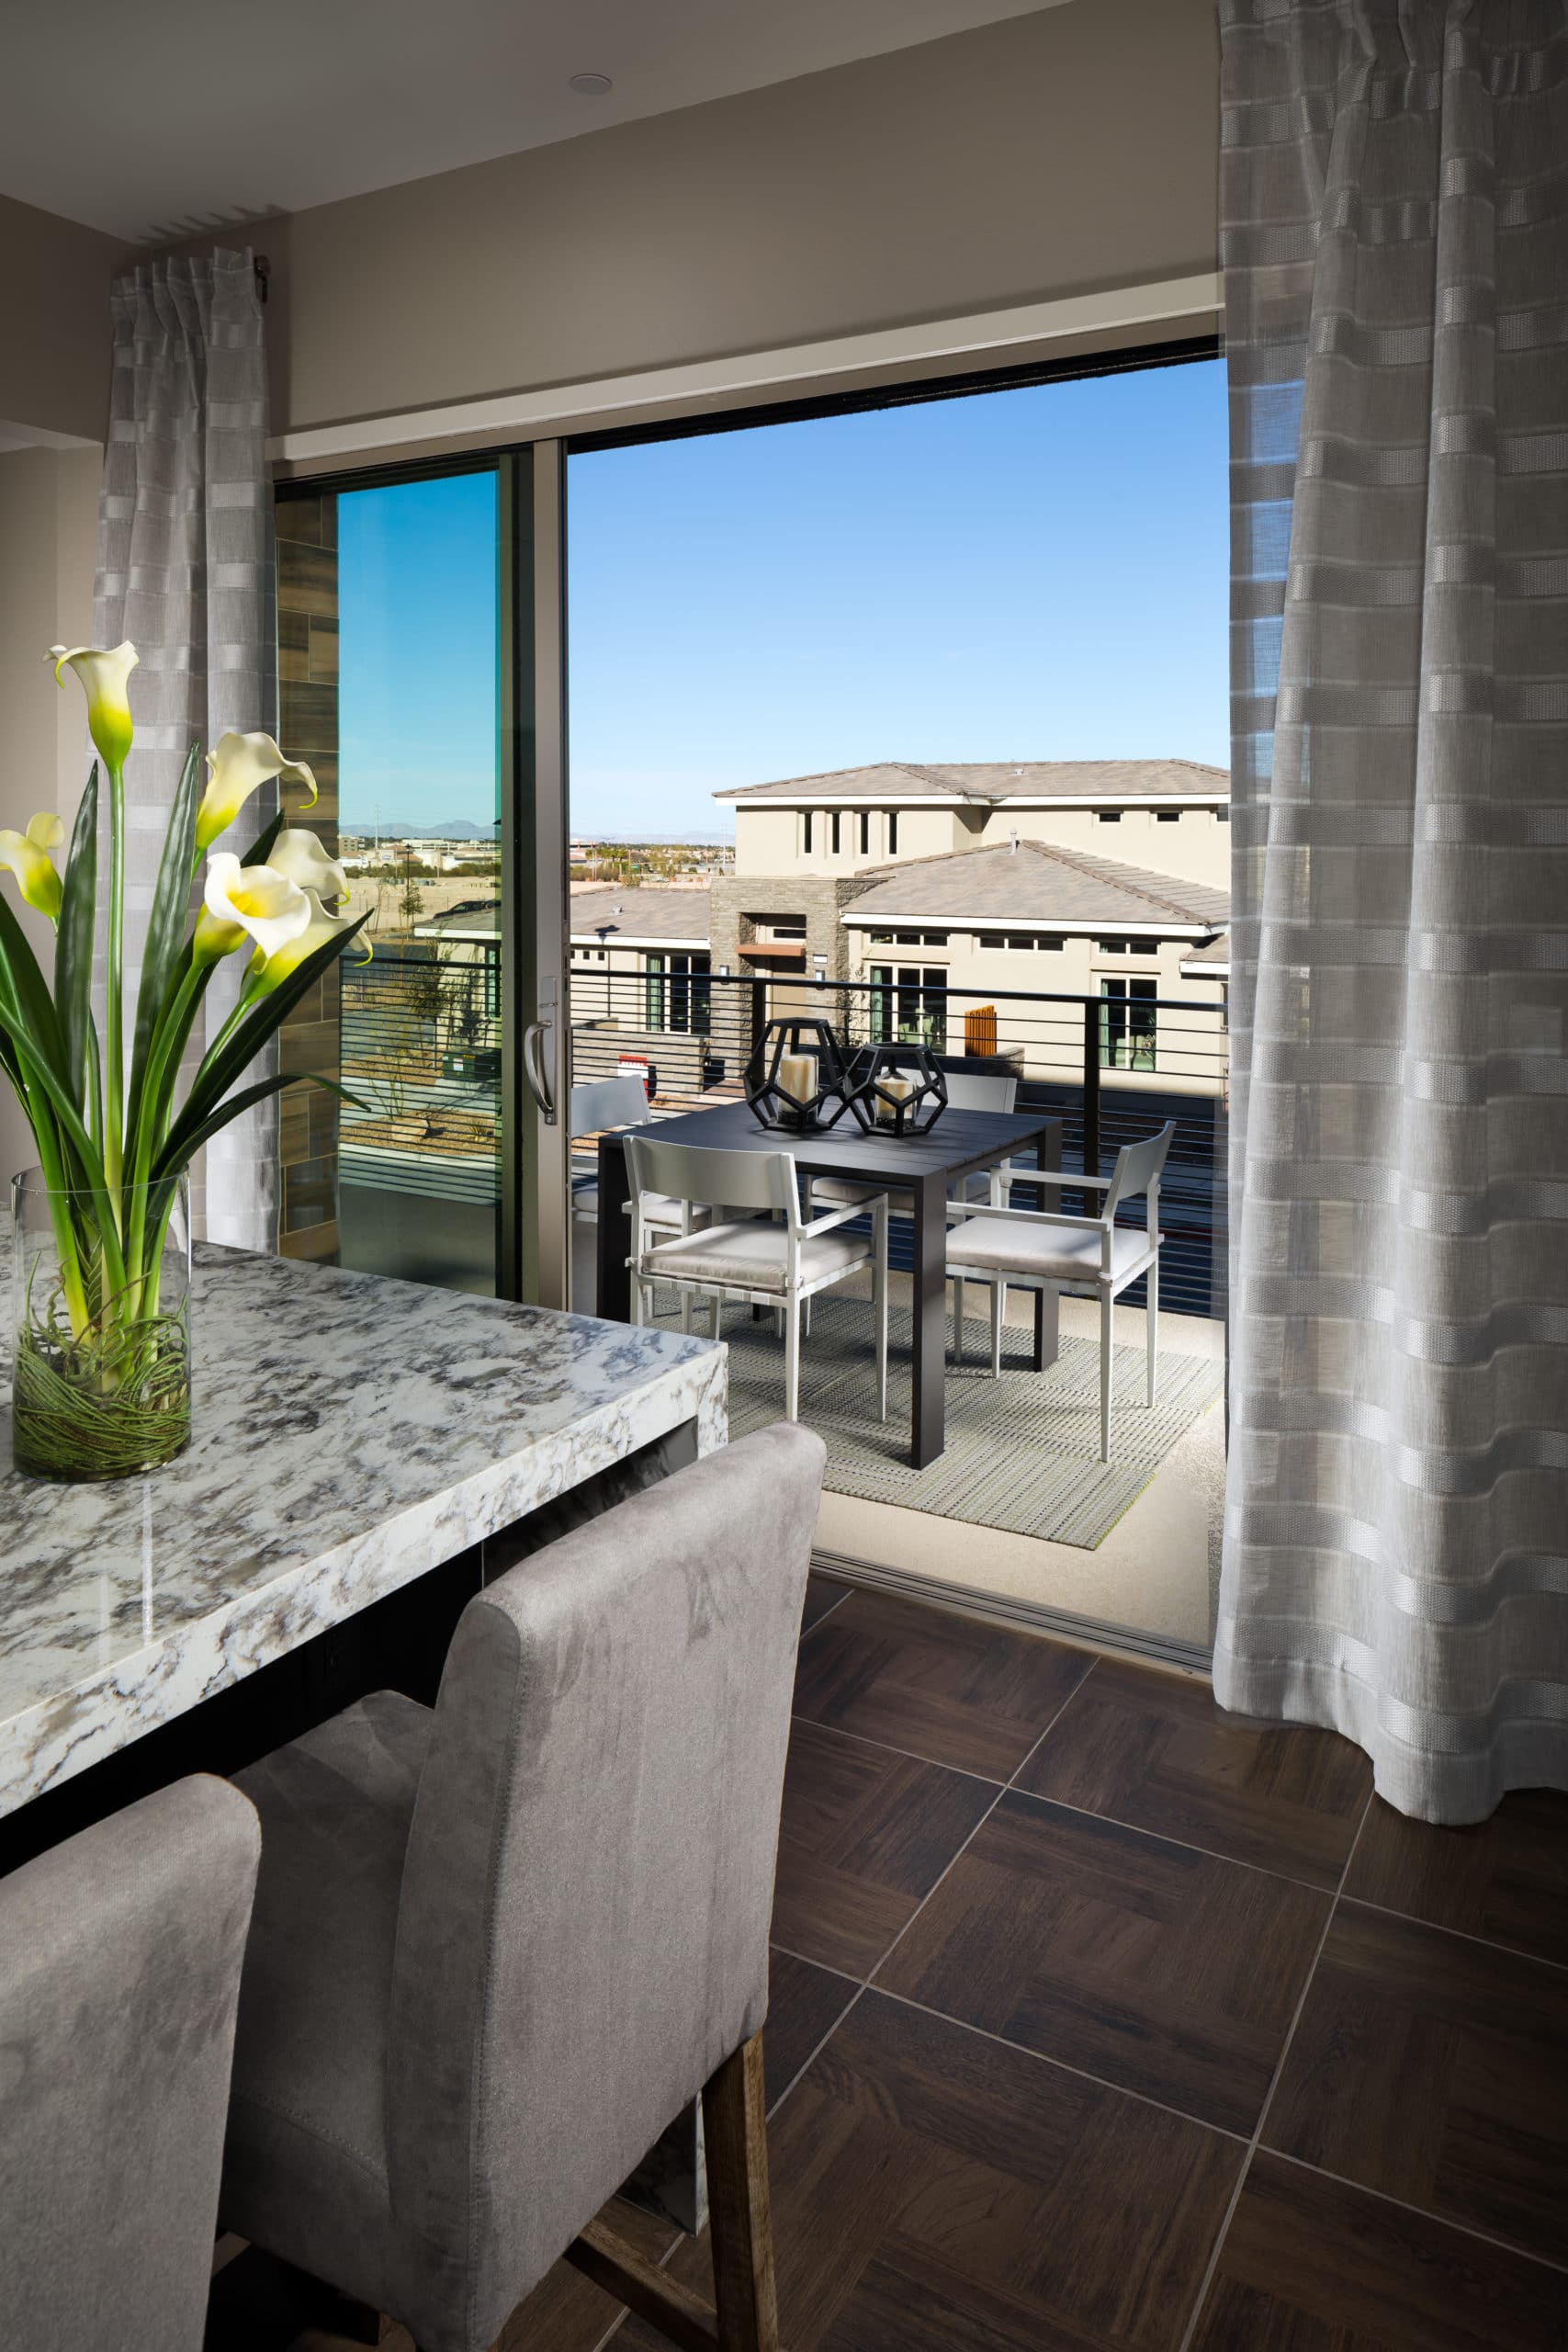 Patio in Viewpoint Model in Modern Collection in Trilogy by Shea Homes in South Square in Summerlin